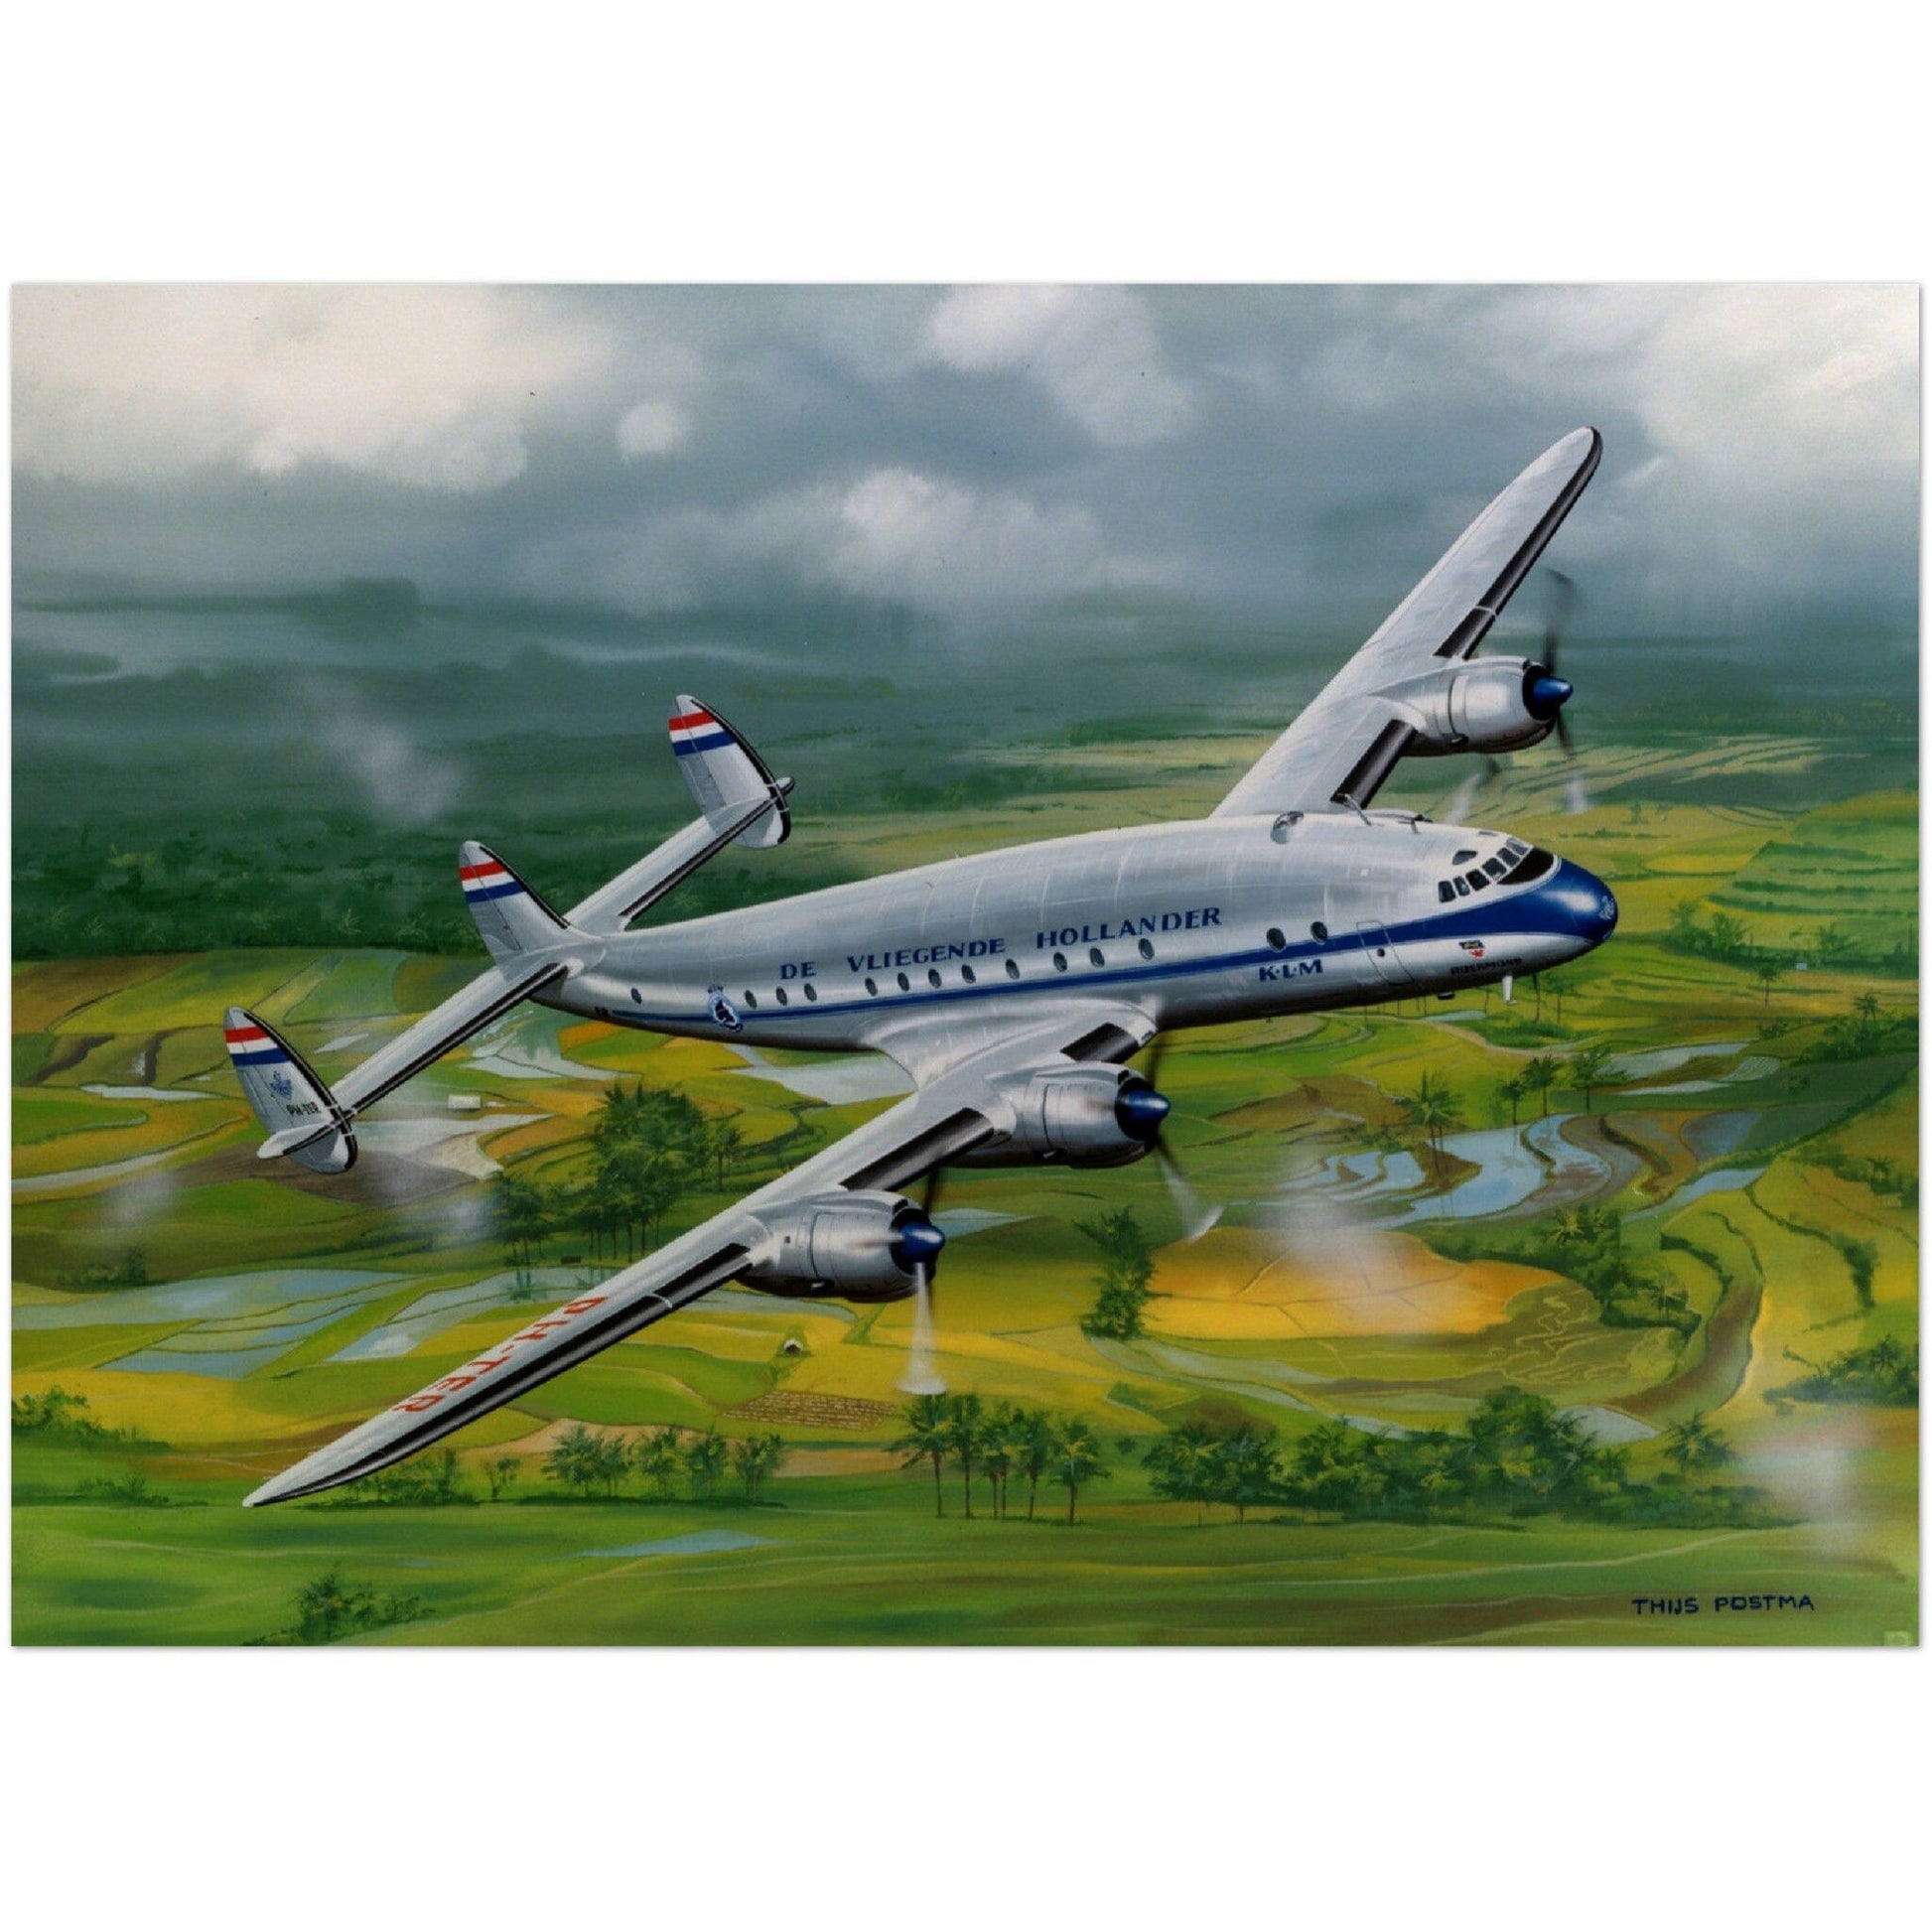 Thijs Postma - Poster - Lockheed L-749 Over Sawahs Poster Only TP Aviation Art 50x70 cm / 20x28″ 